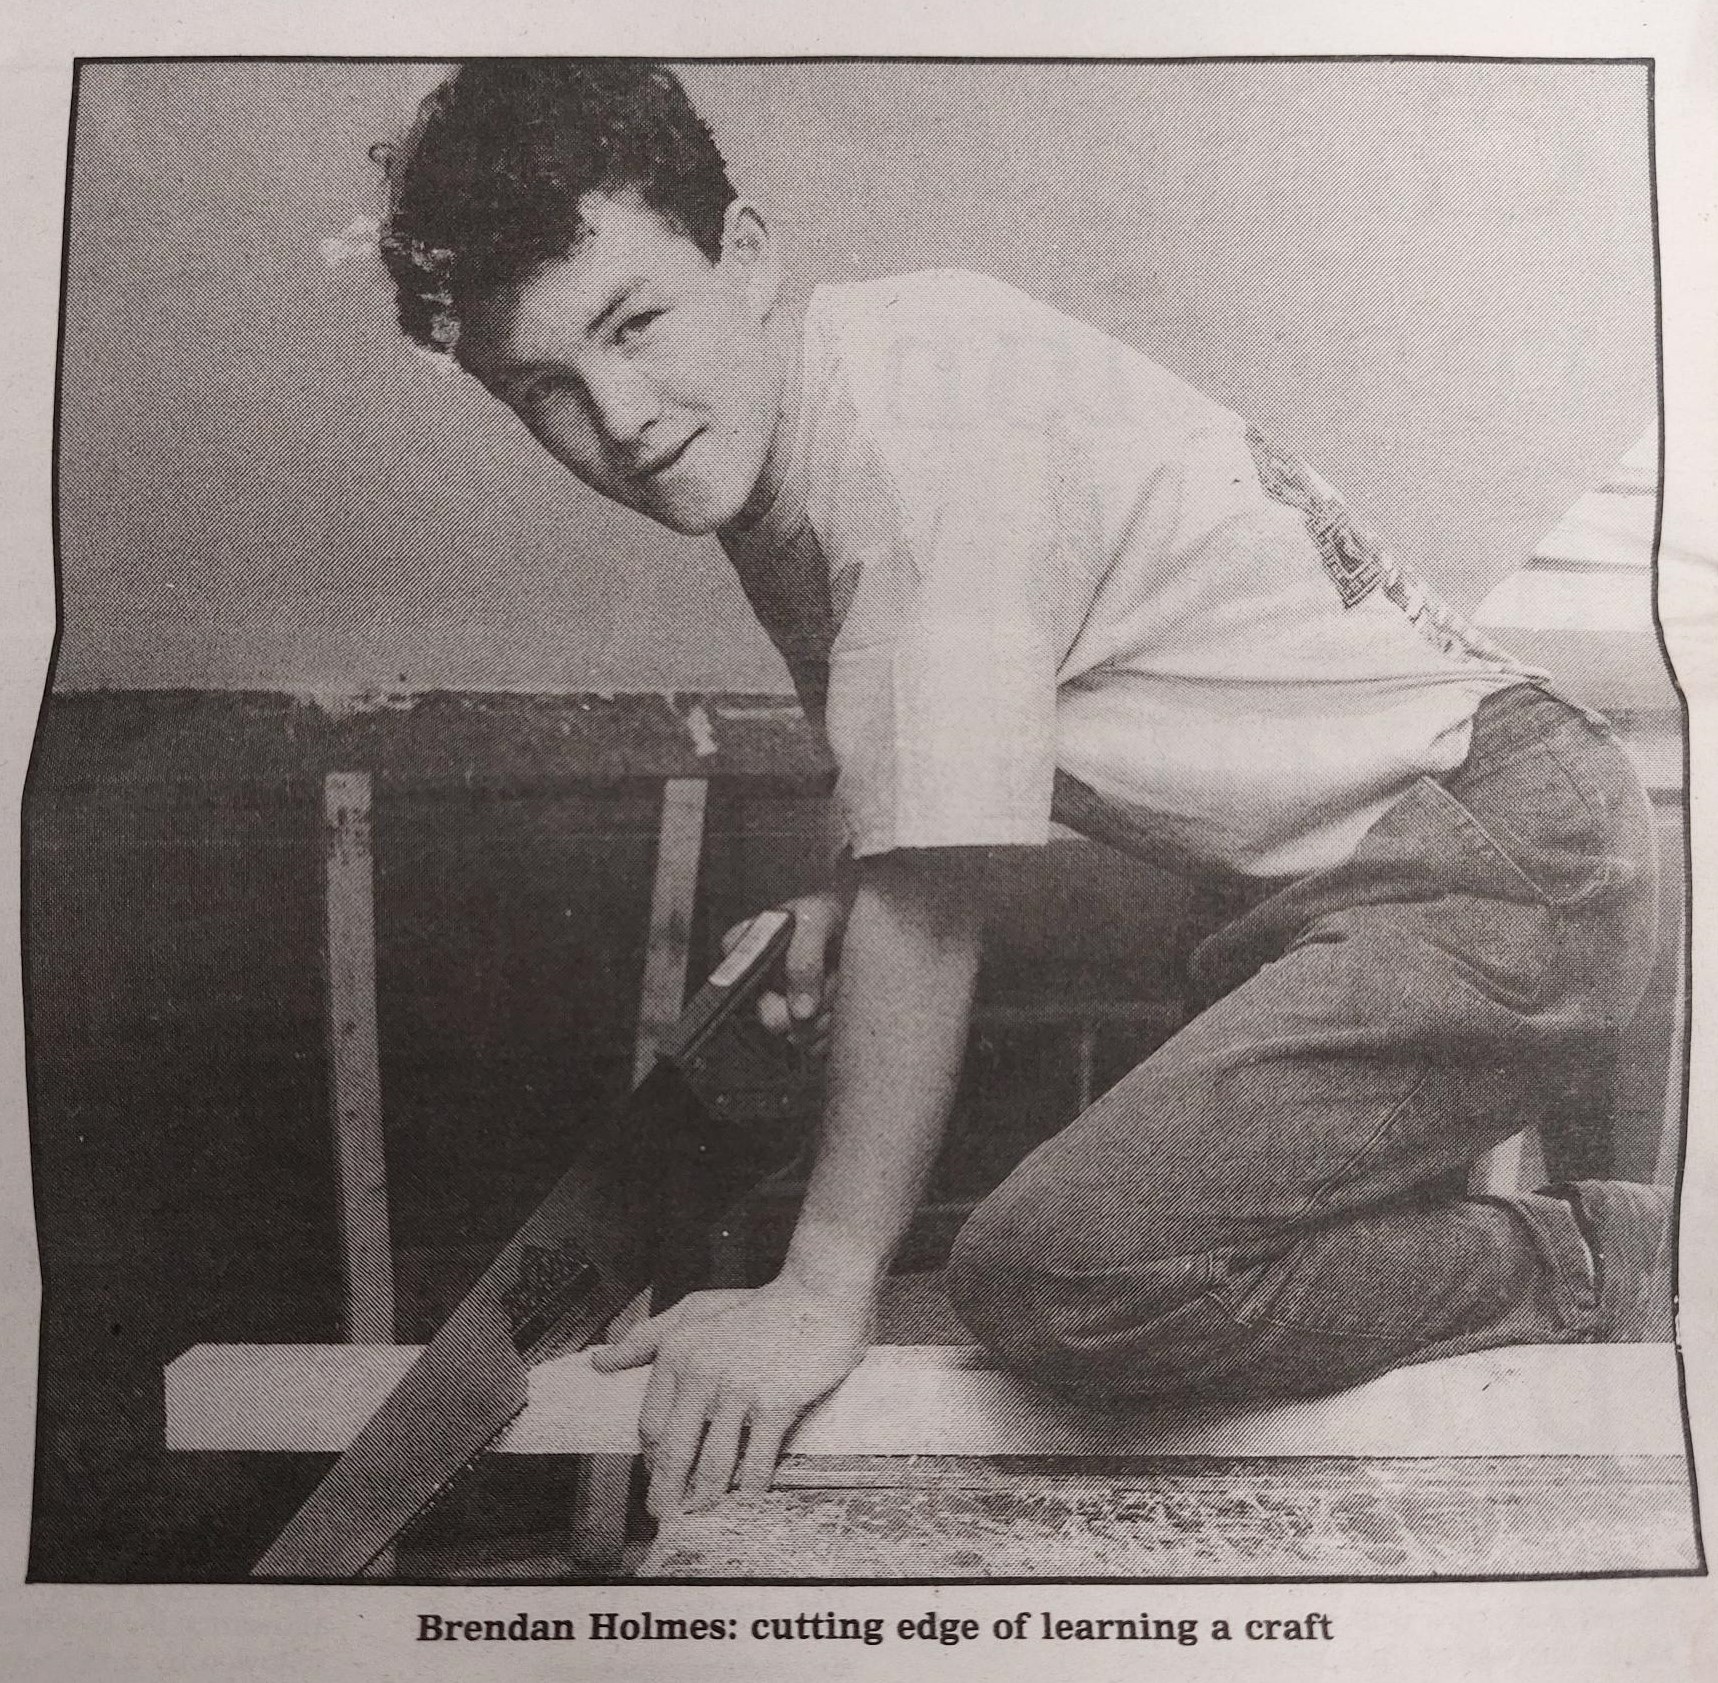 Brendan as a 16 year old working in College